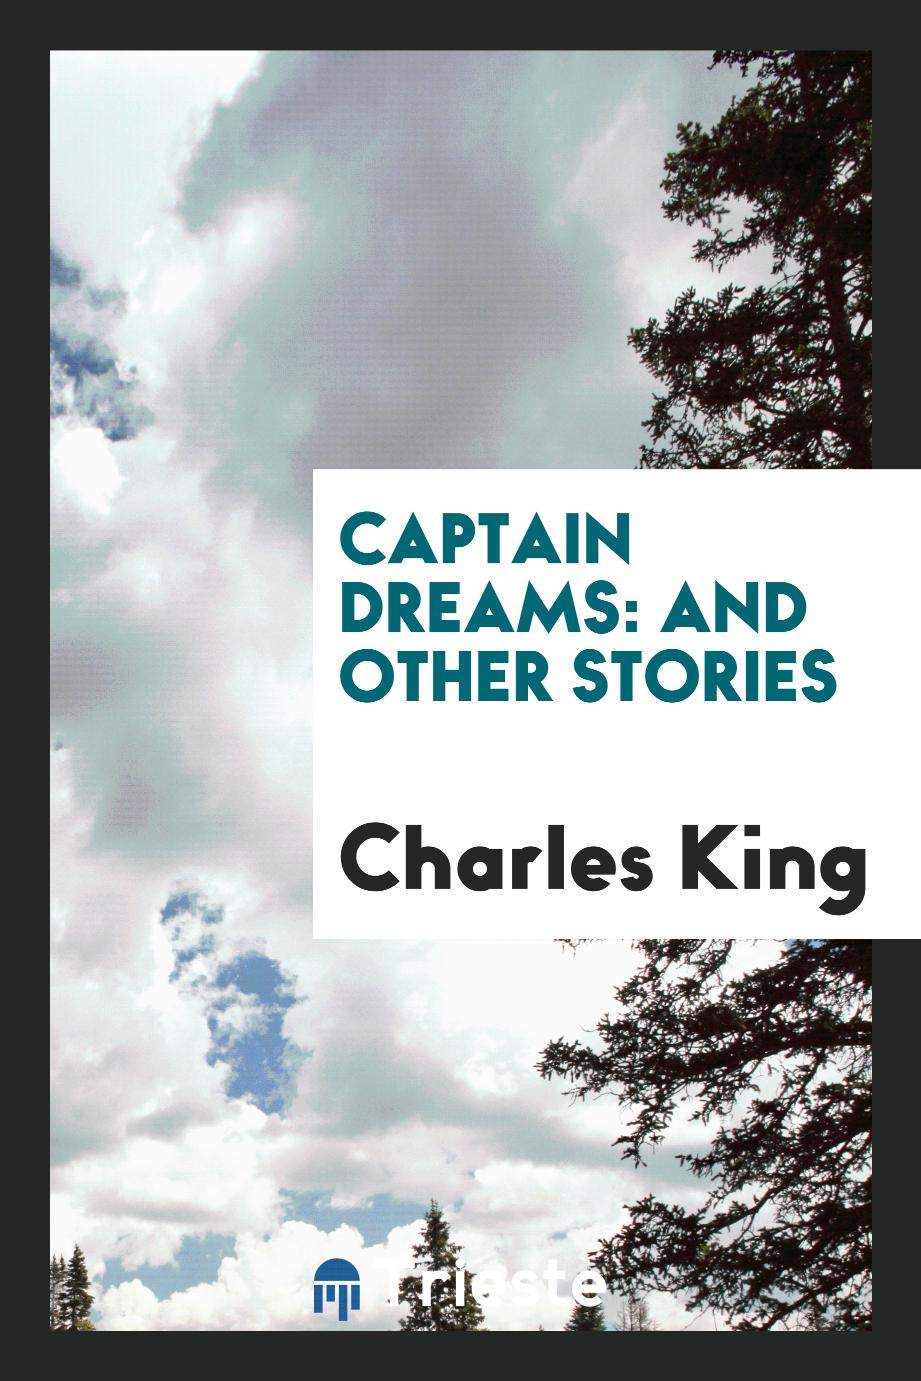 Captain Dreams: and other stories